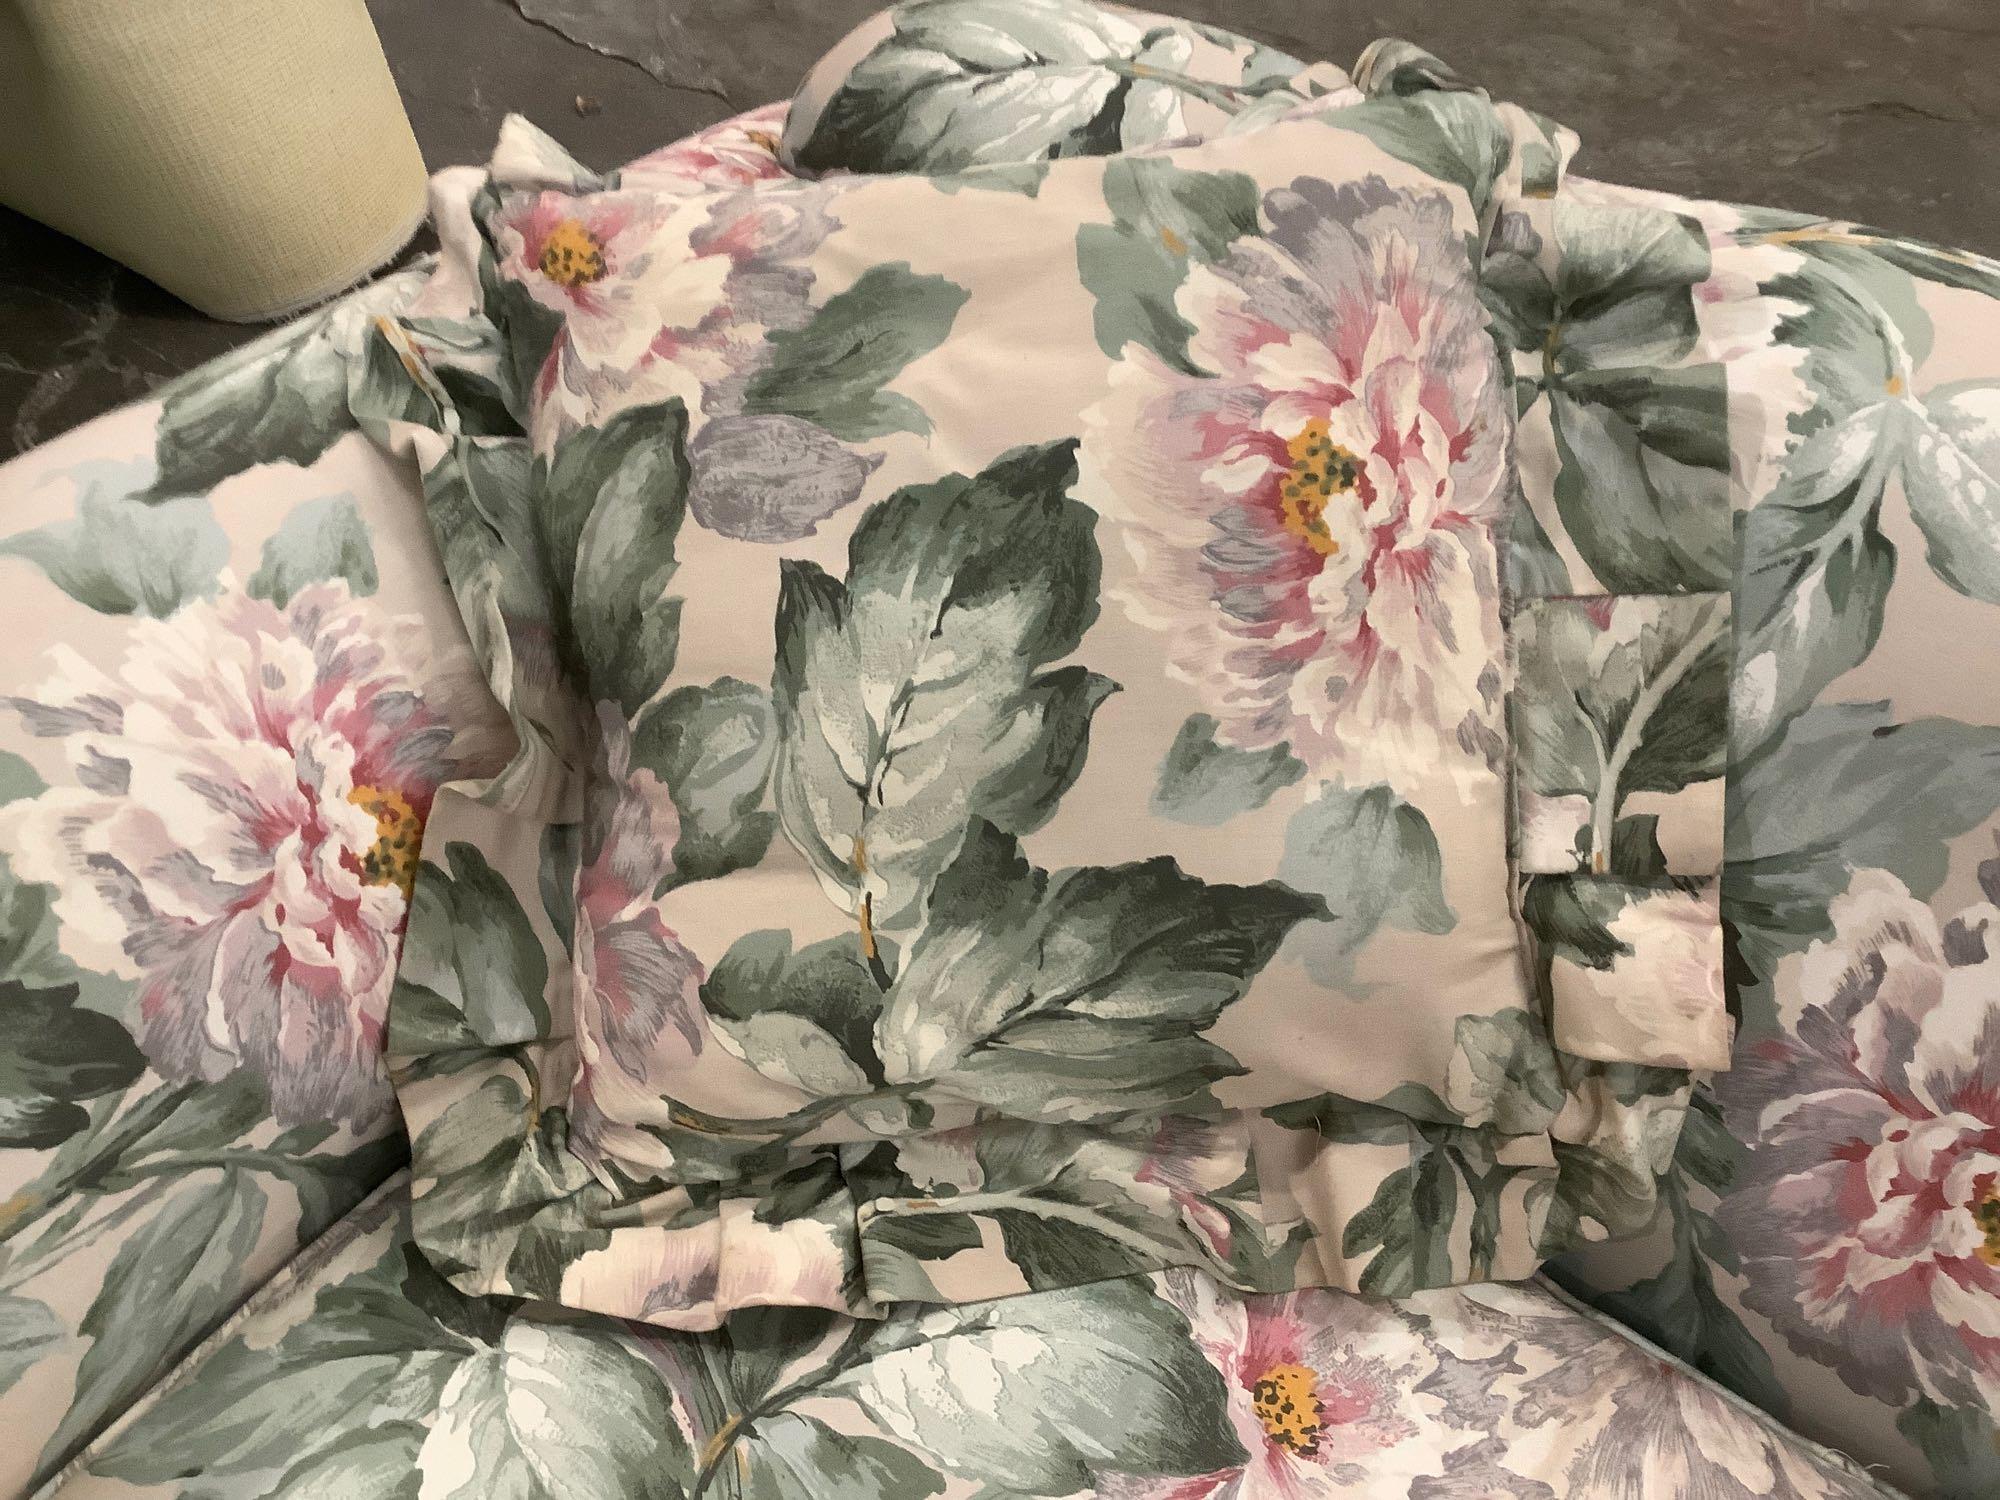 Floral print couch w/ 2 matching throw pillows, shows wear, see pics.